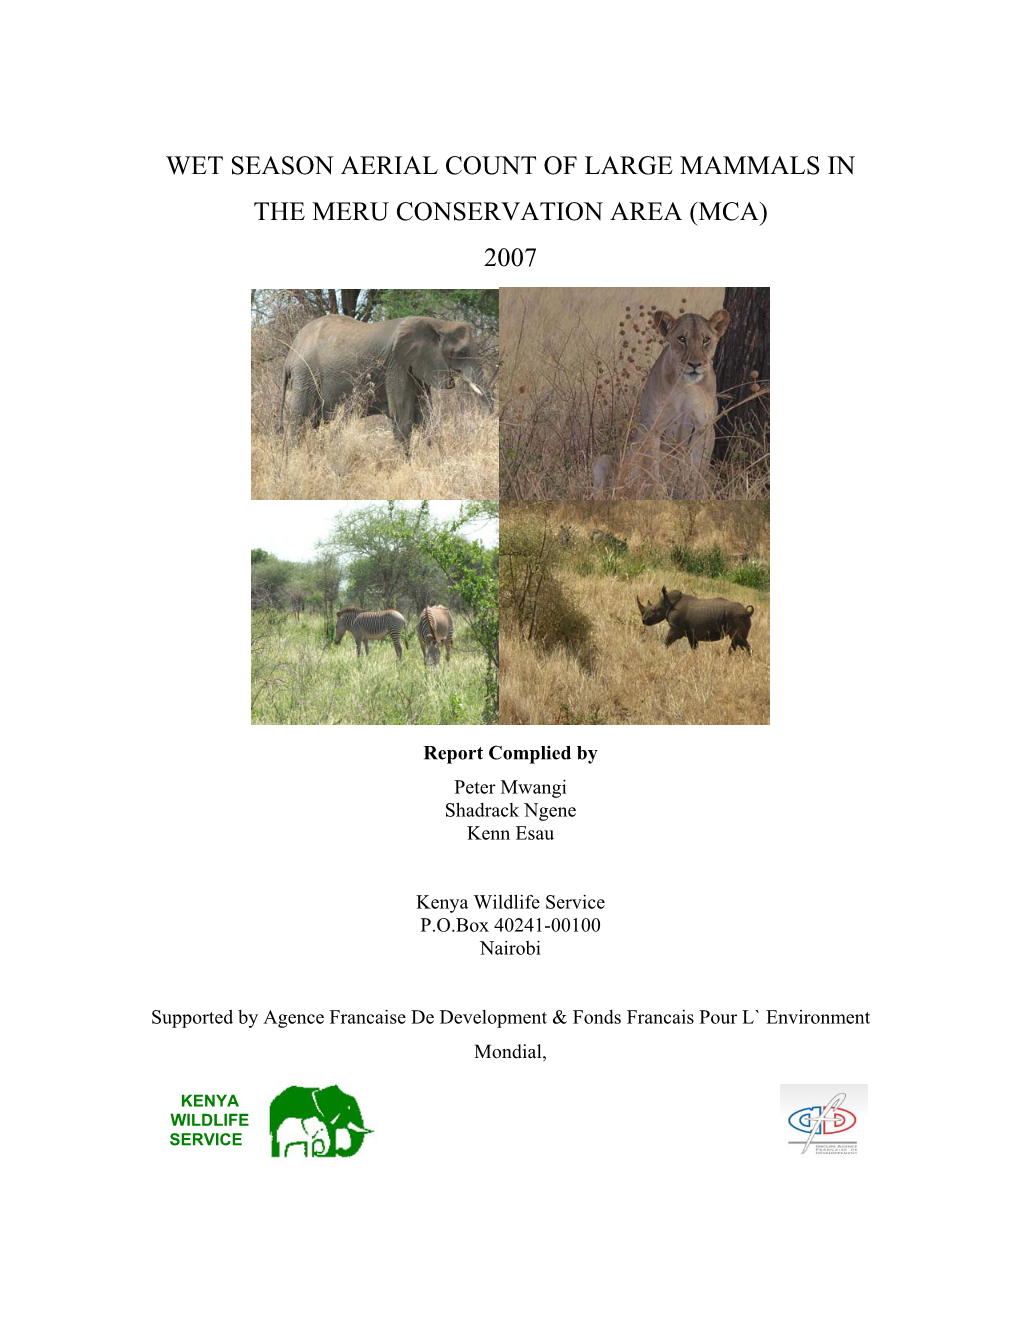 Wet Season Aerial Count of Large Mammals in the Meru Conservation Area (Mca) 2007